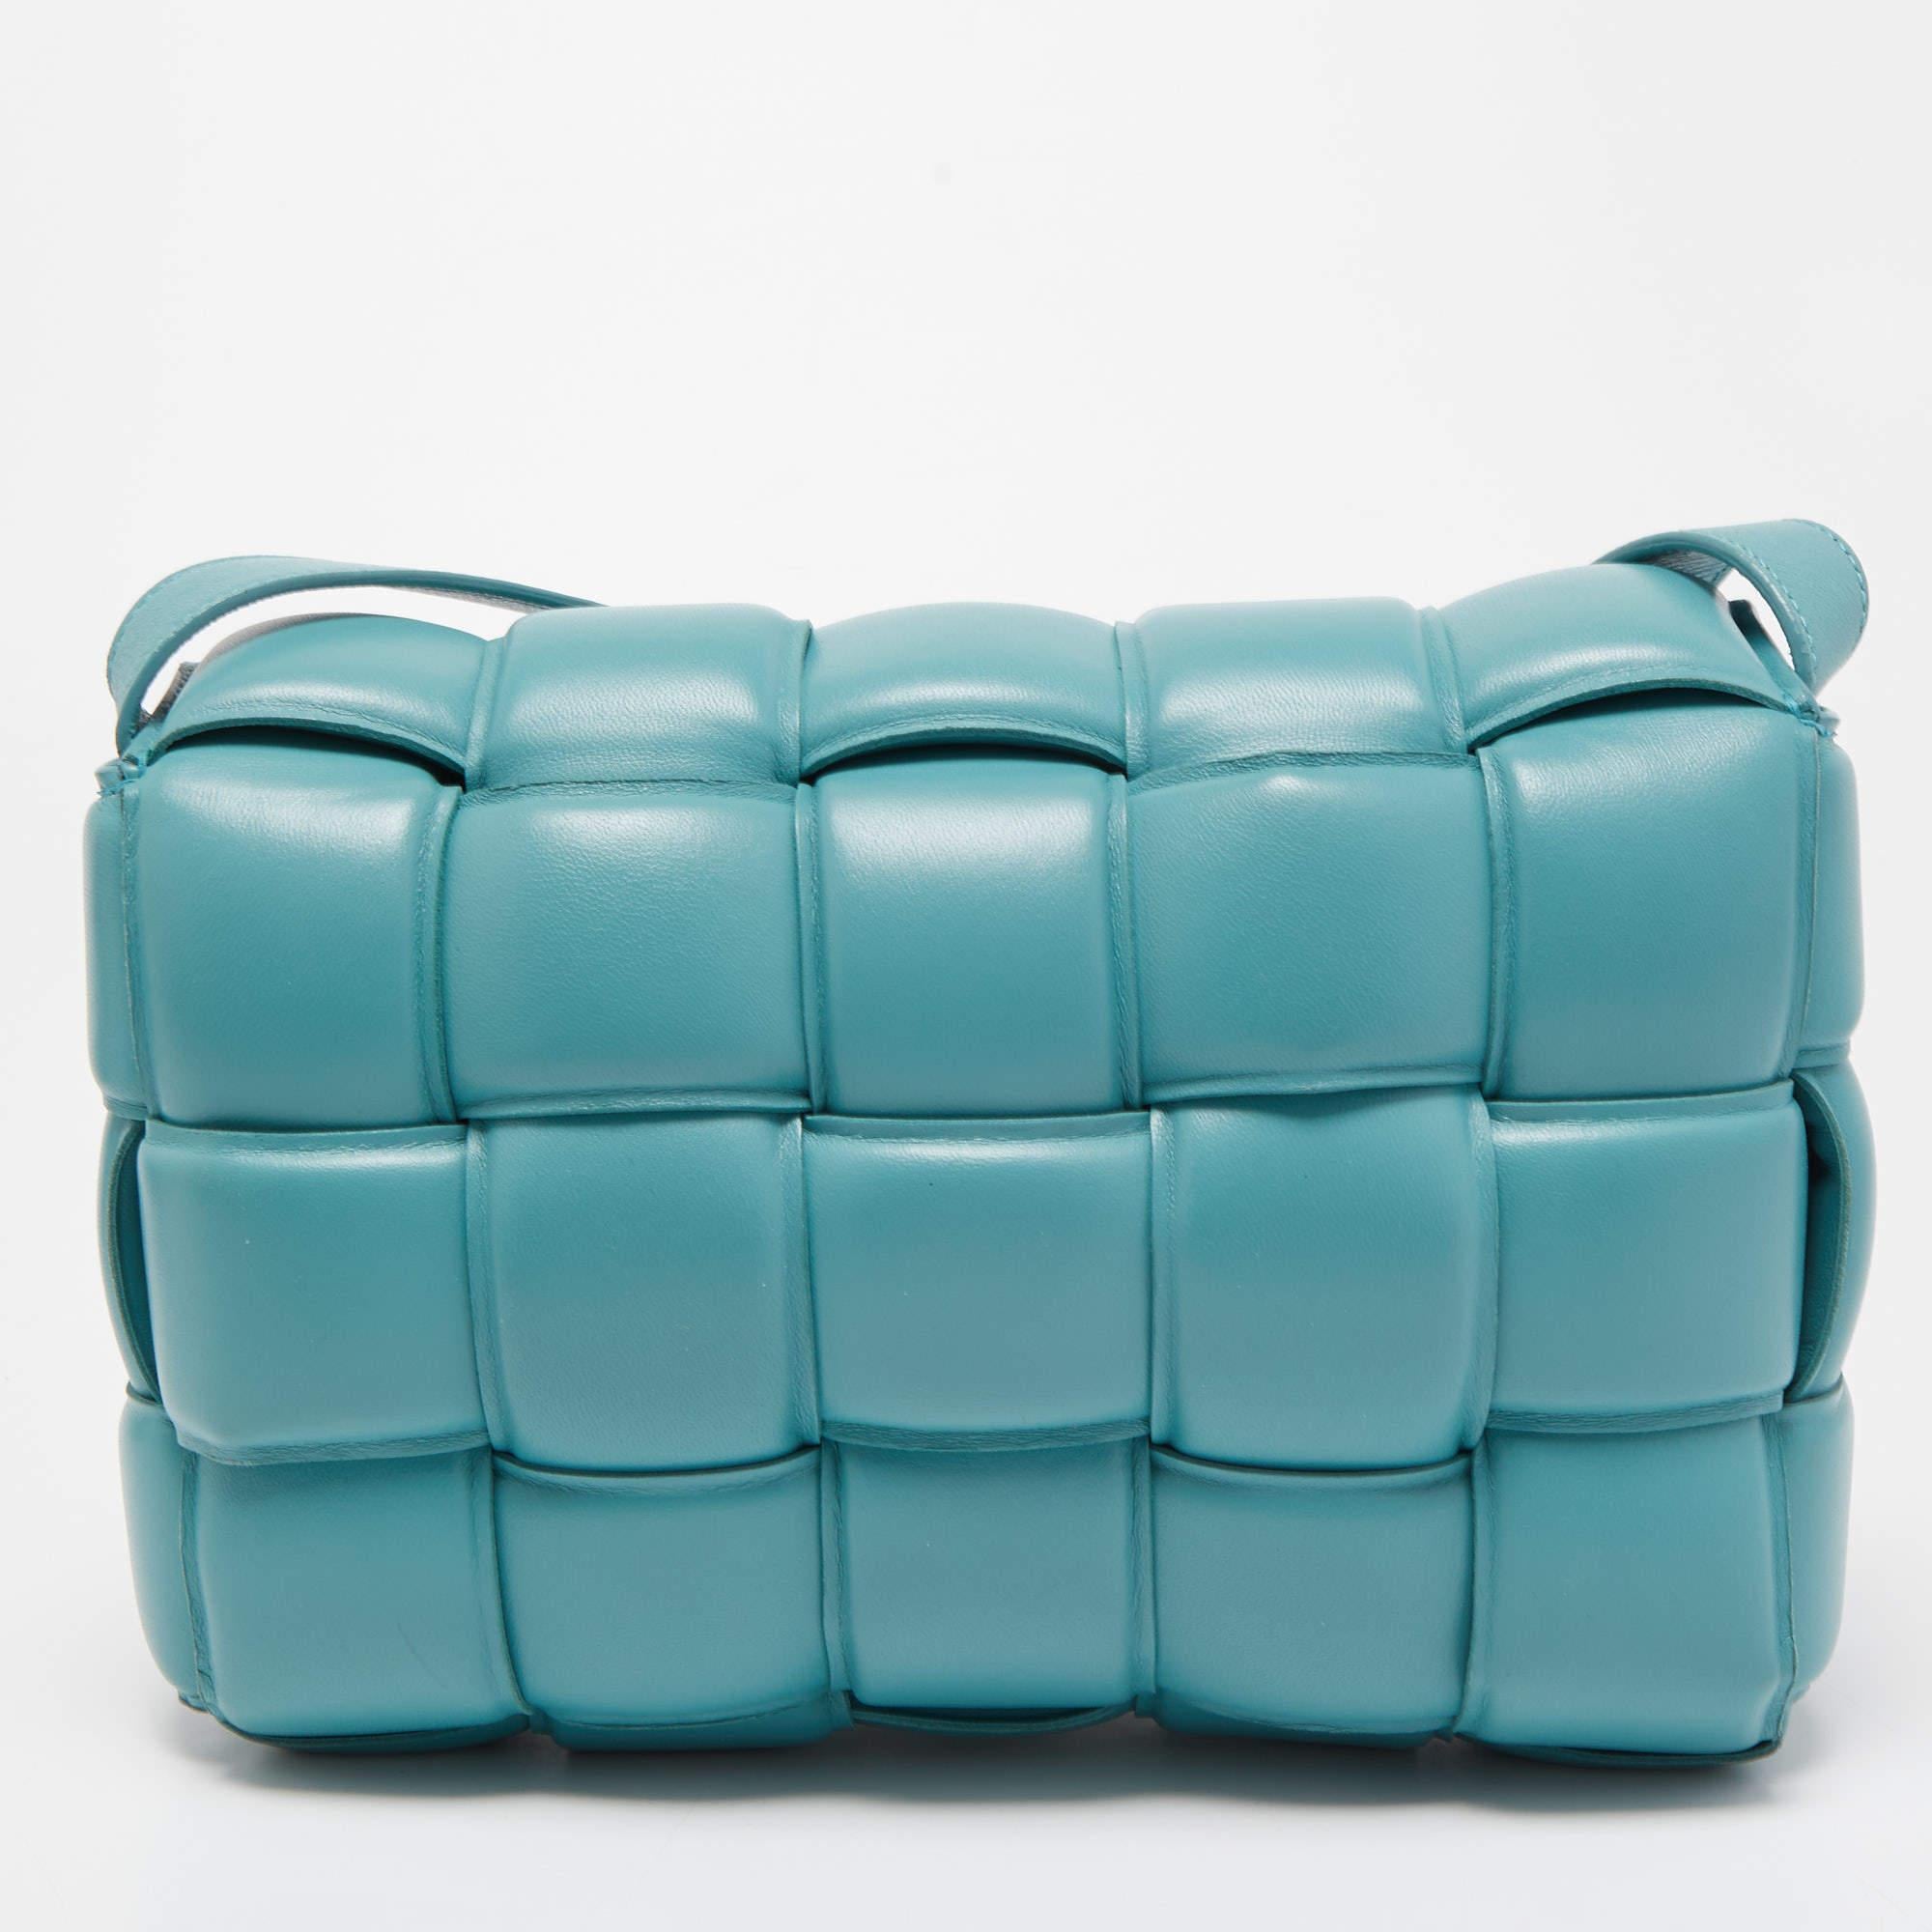 Meet the iconic Cassette bag from the house of Bottega Veneta. We have here one in turquoise leather, flaunting a padded weave and a long flat strap. The insides are well-sized to fit your phone, wallet, and make-up must-haves. So, do not think